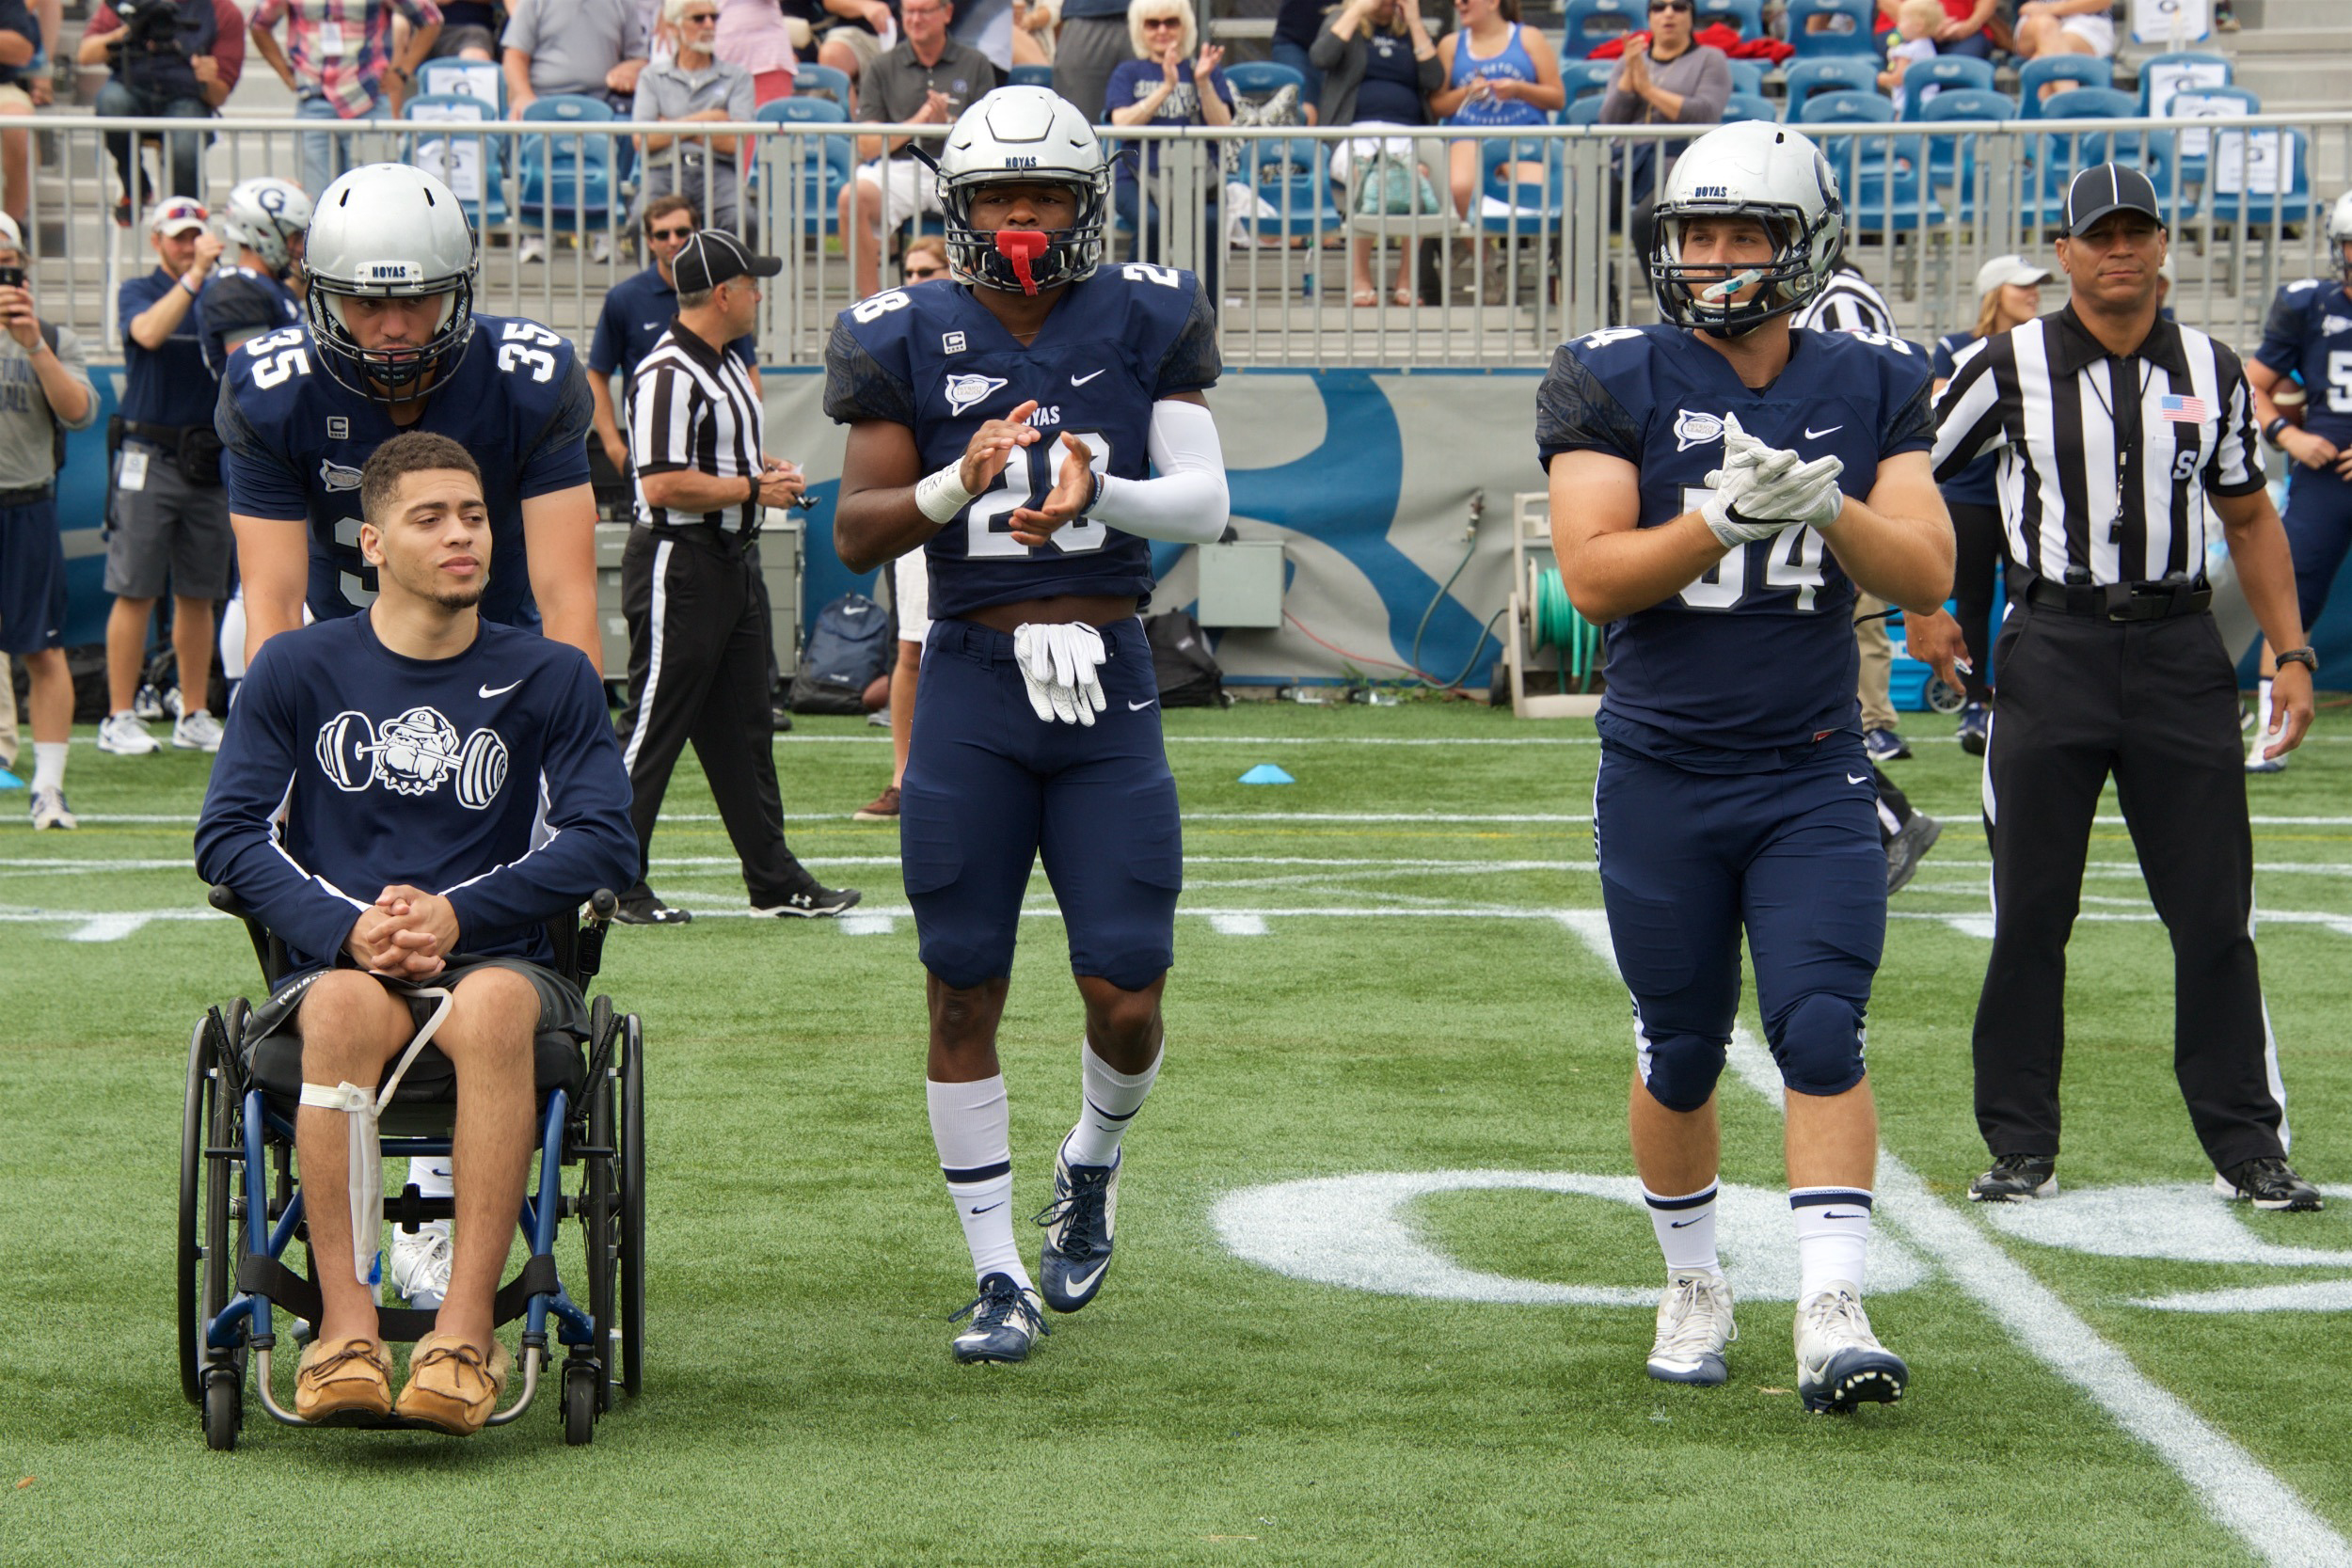 PHOTO: Ty Williams heads to midfield for the coin toss vs. Davidson as a team captain in September 2016. He was injured during a game in 2015.